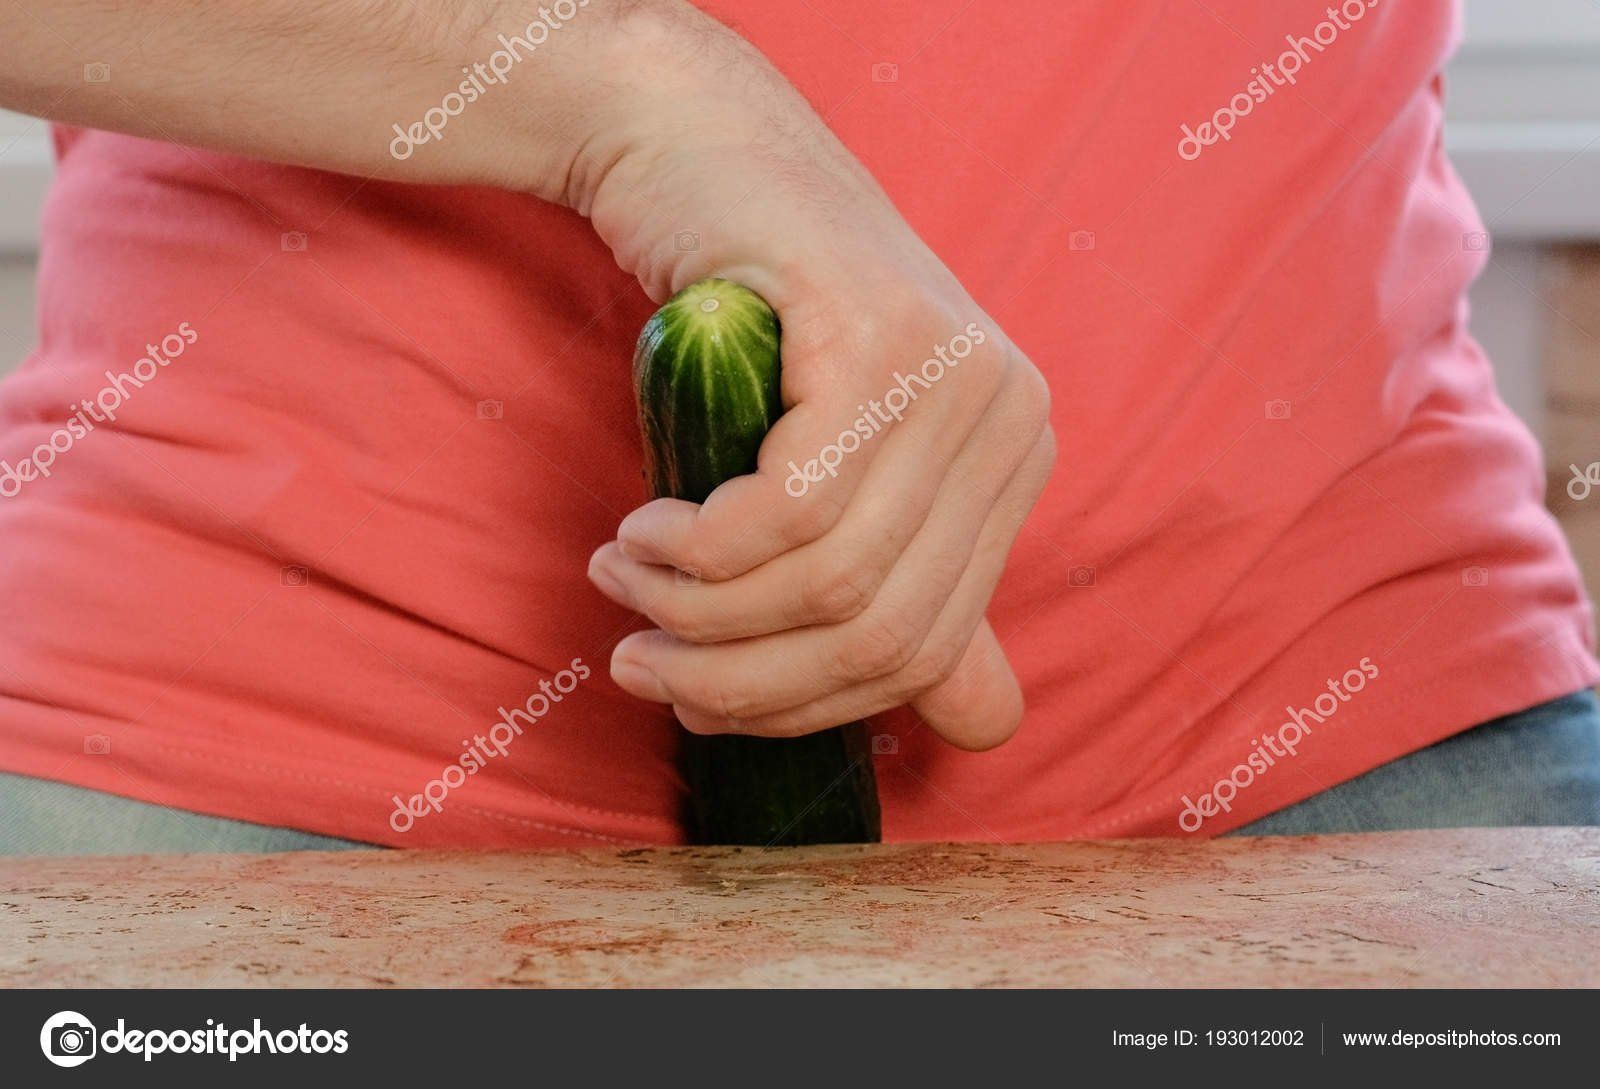 Athens reccomend Jerk off using a cucumber